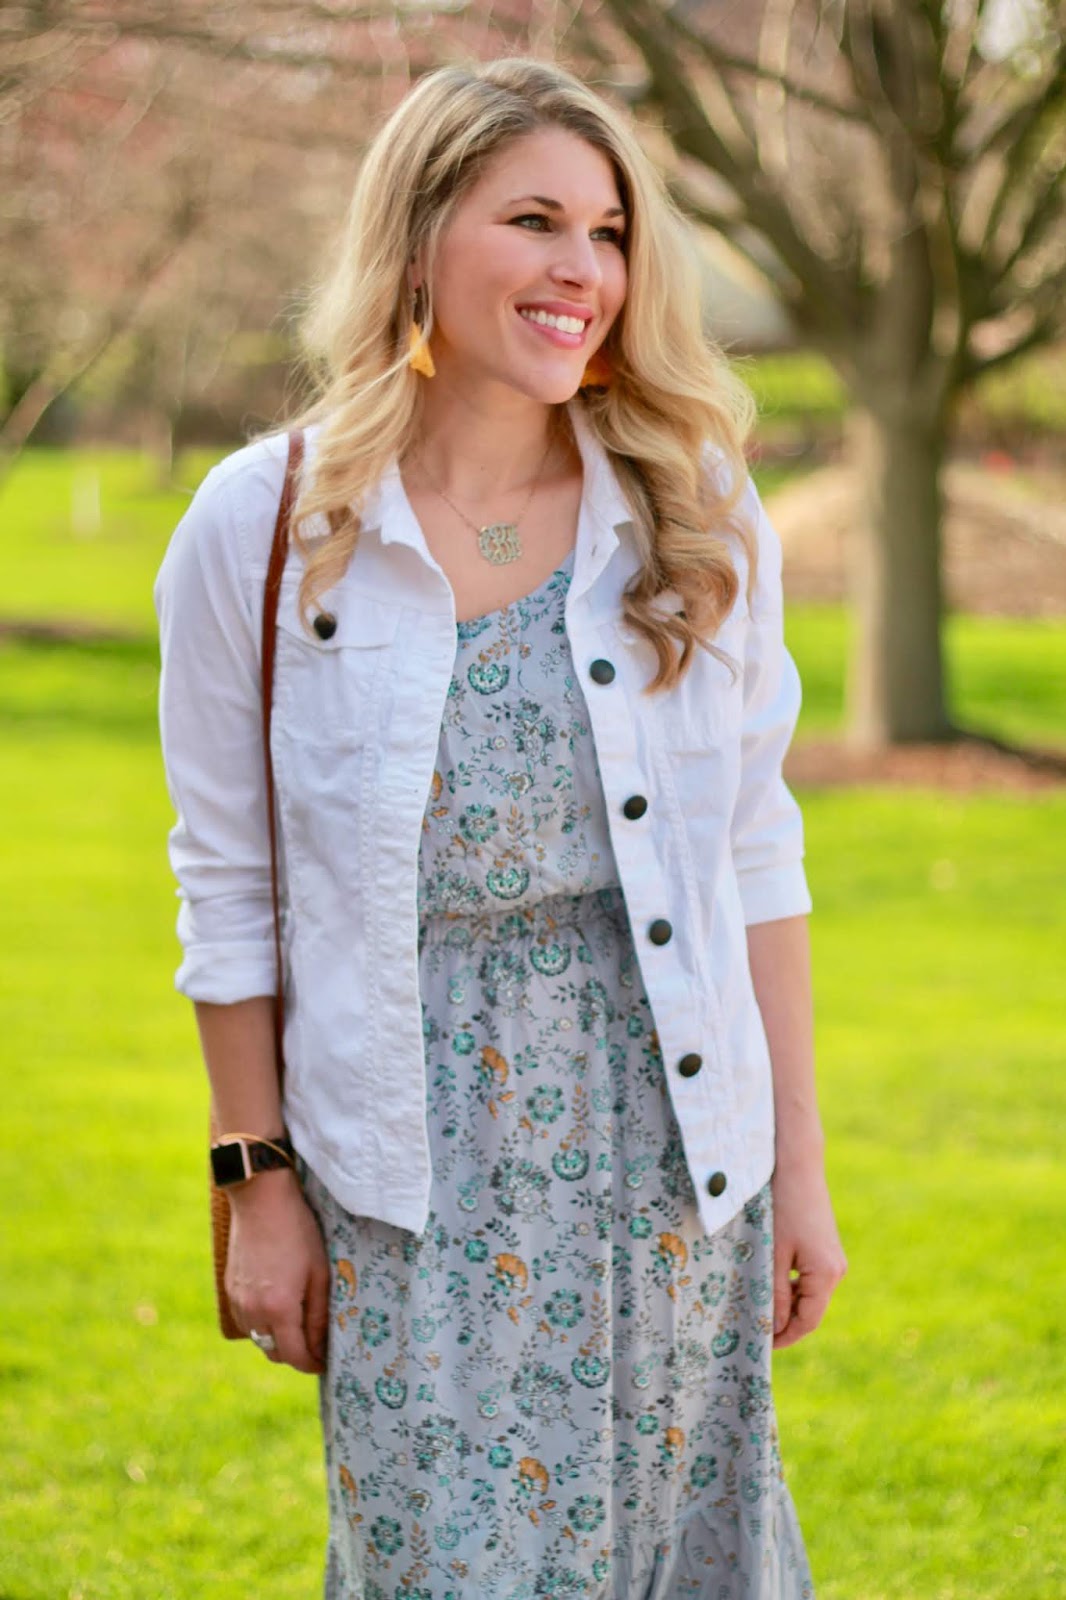 Spring Layering & Confident Twosday Linkup - I do deClaire